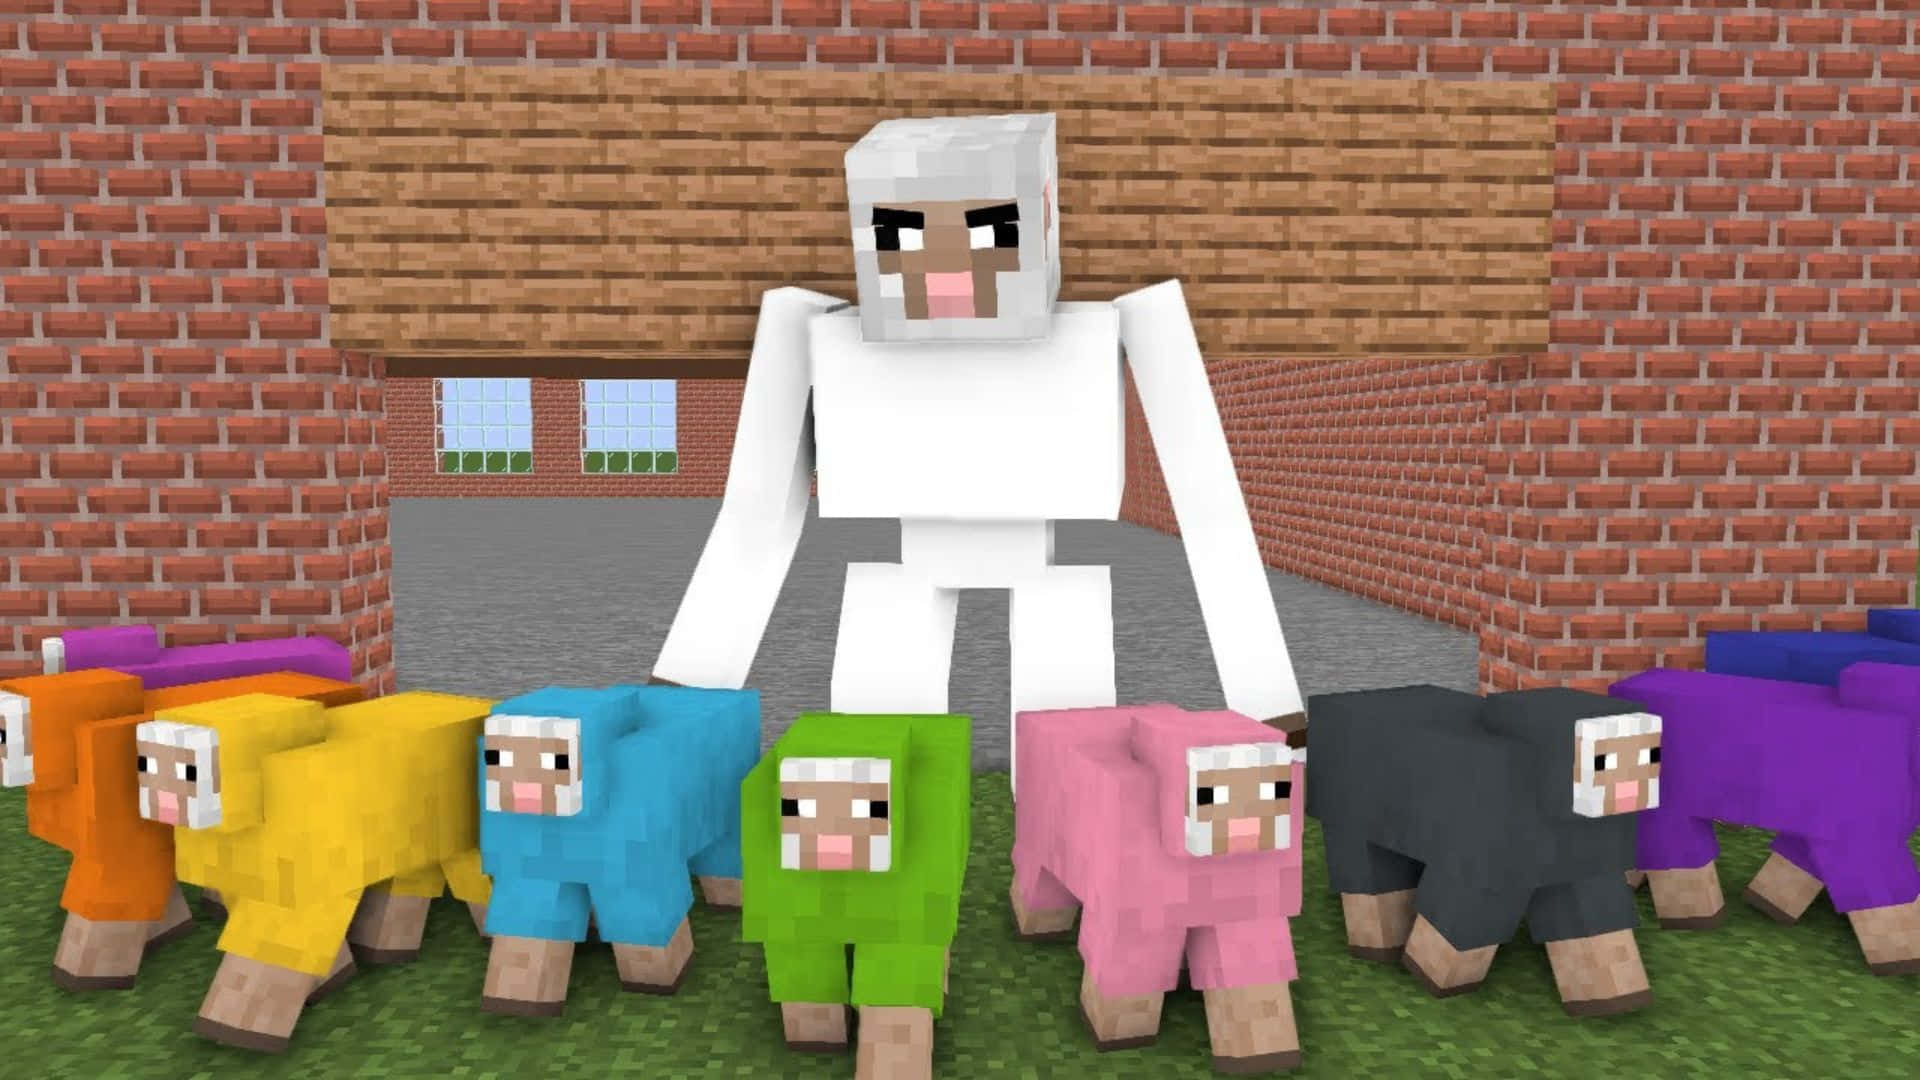 Colorful Minecraft Sheep Roaming the Landscape Wallpaper